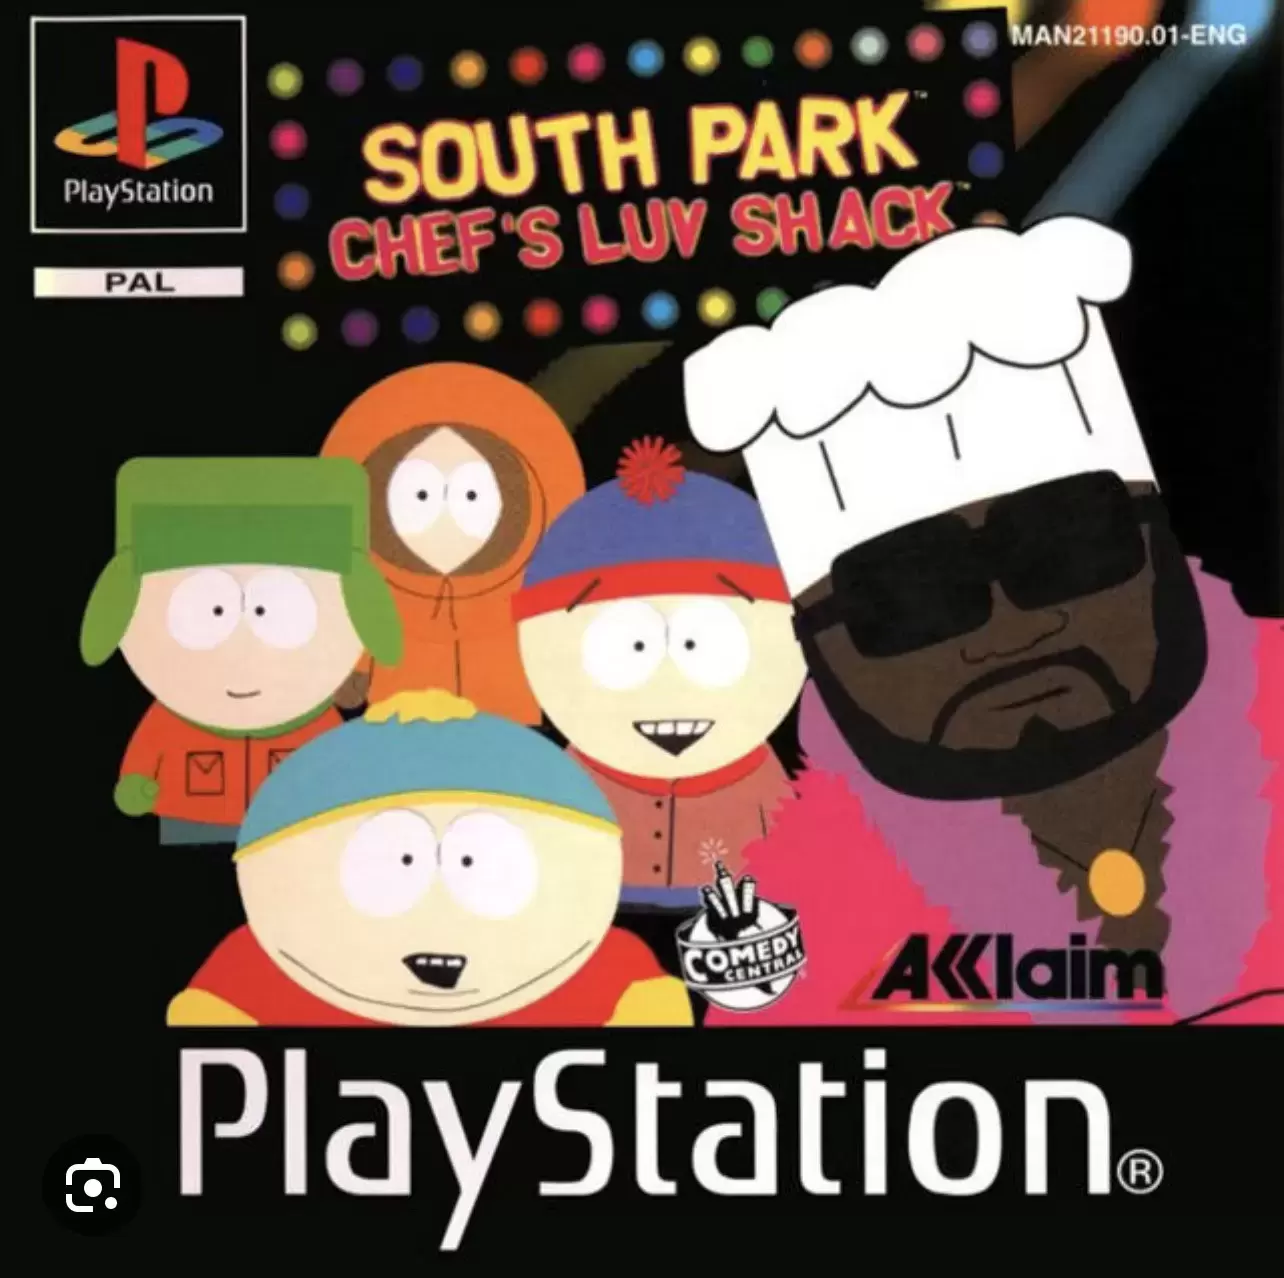 Playstation games - South Park Chef’s Luv Shack